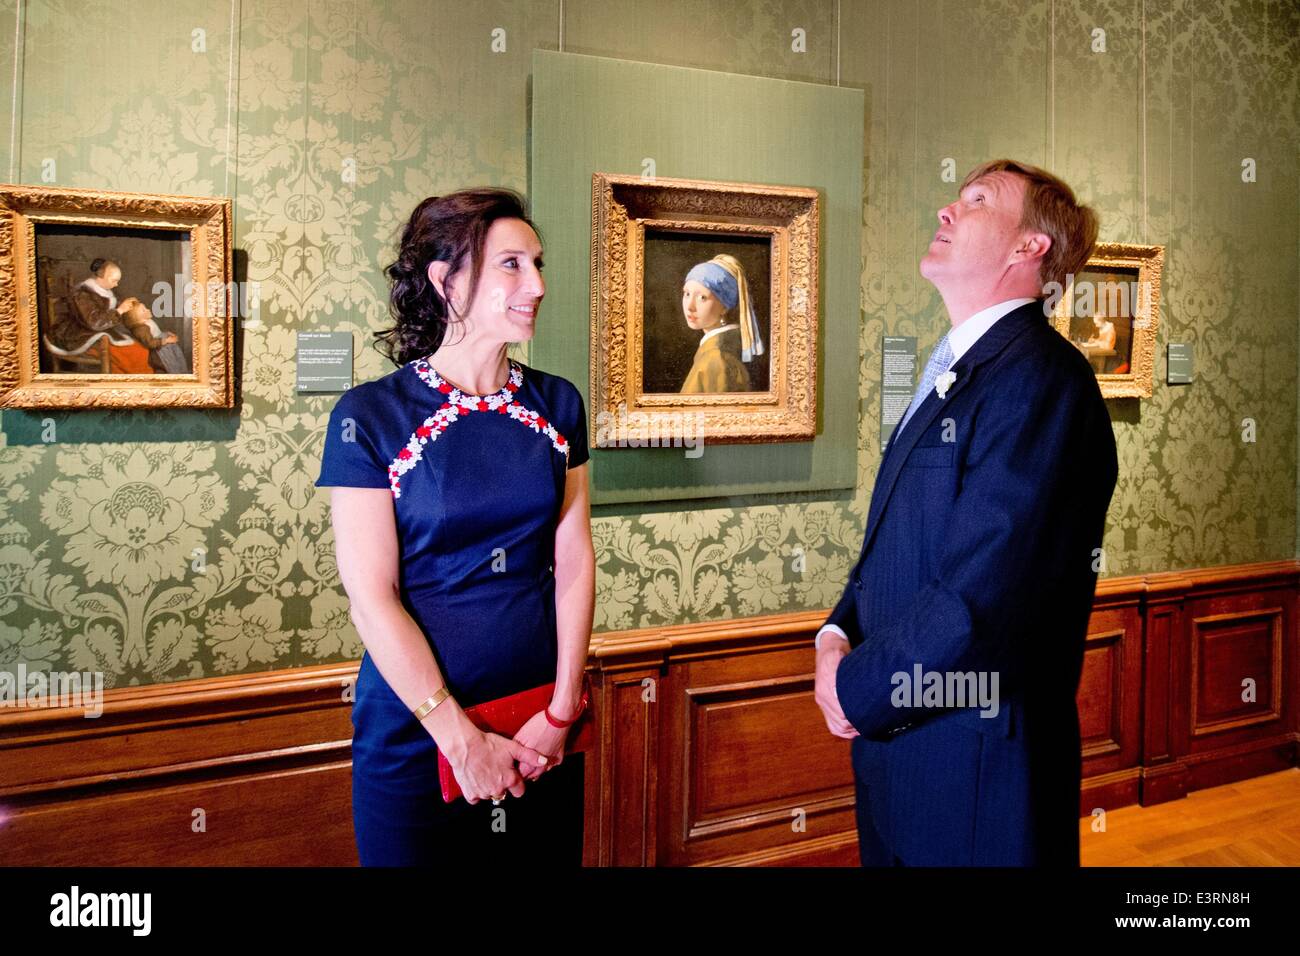 Dutch King Willem-Alexander visits the Mauritshuis museum in The Hague, The Netherlands after the re-opening, 27 June 2014. In the background: the master piece 'Girl with a Pearl Earring' of Johannes Vermeer. The museum has been renovated the last two years and expanded. Photo: Patrick van Katwijk -NO WIRE SERVICE- Stock Photo